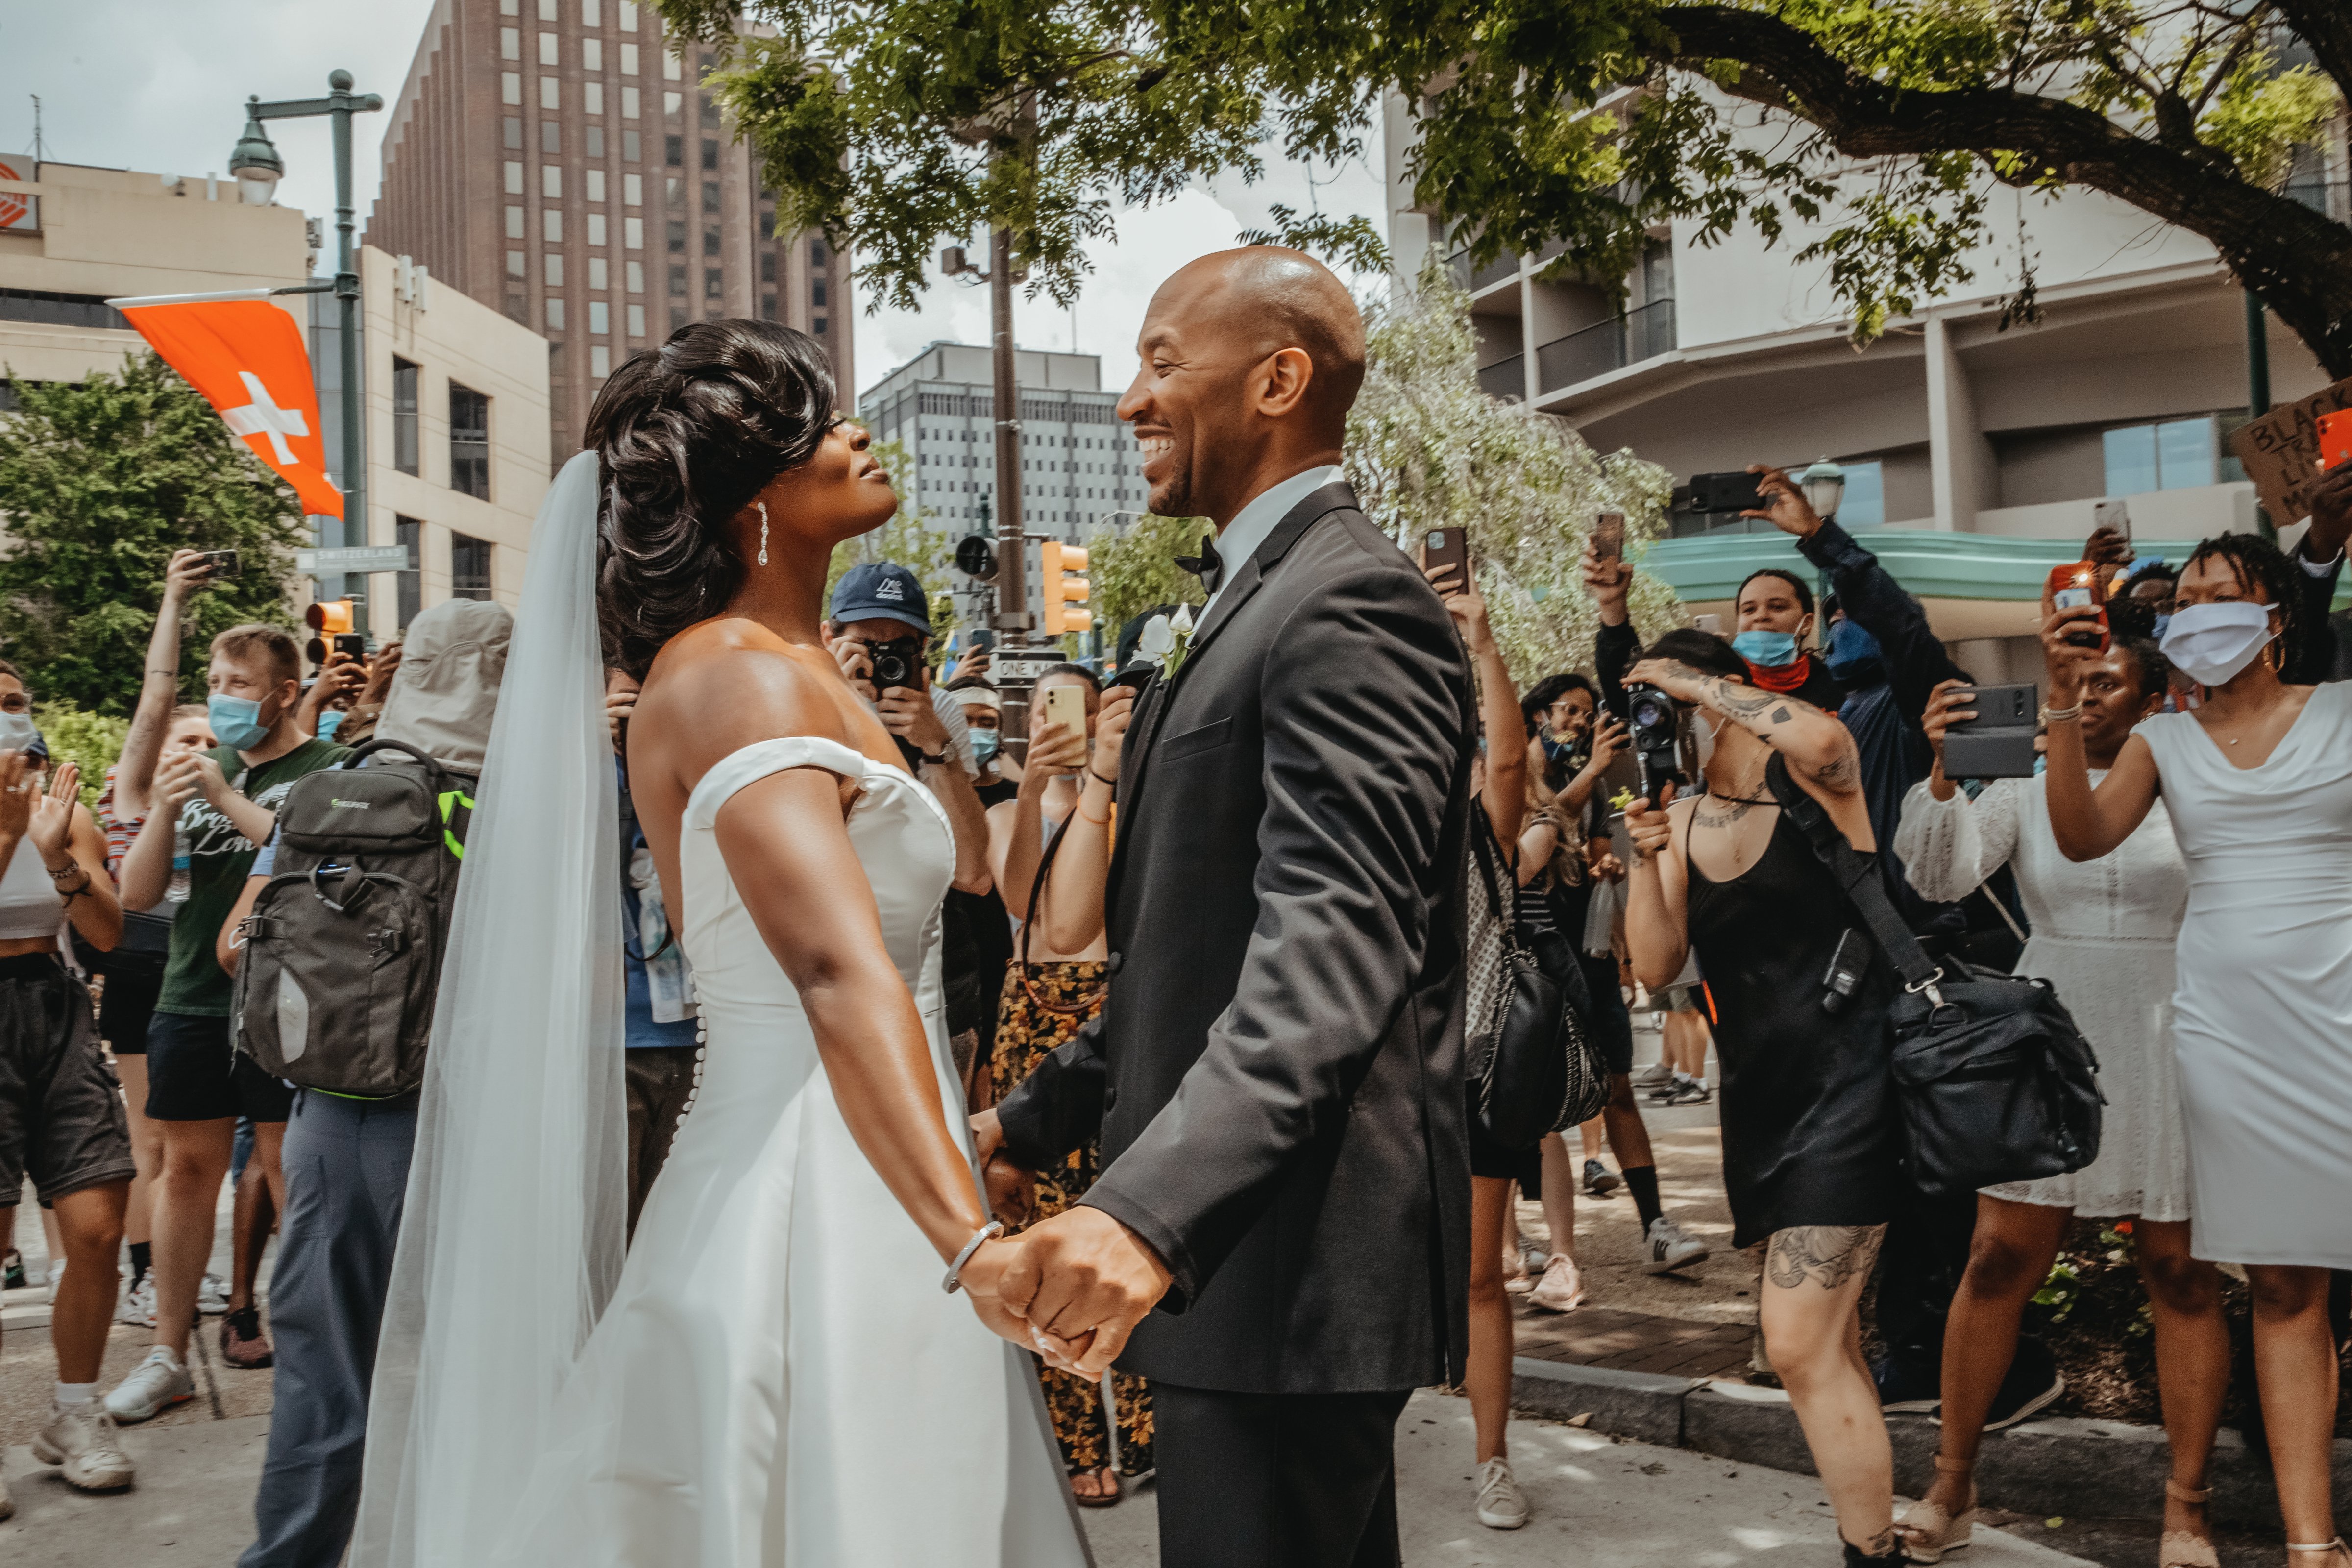 Dr. Kerry Anne Perkins and Michael Gordon join a Black Lives Matter protest taking place alongside their wedding ceremony at The Logan hotel in Philadelphia on June 6, 2020. (Linda McQueen—Linda McQueen Photography)